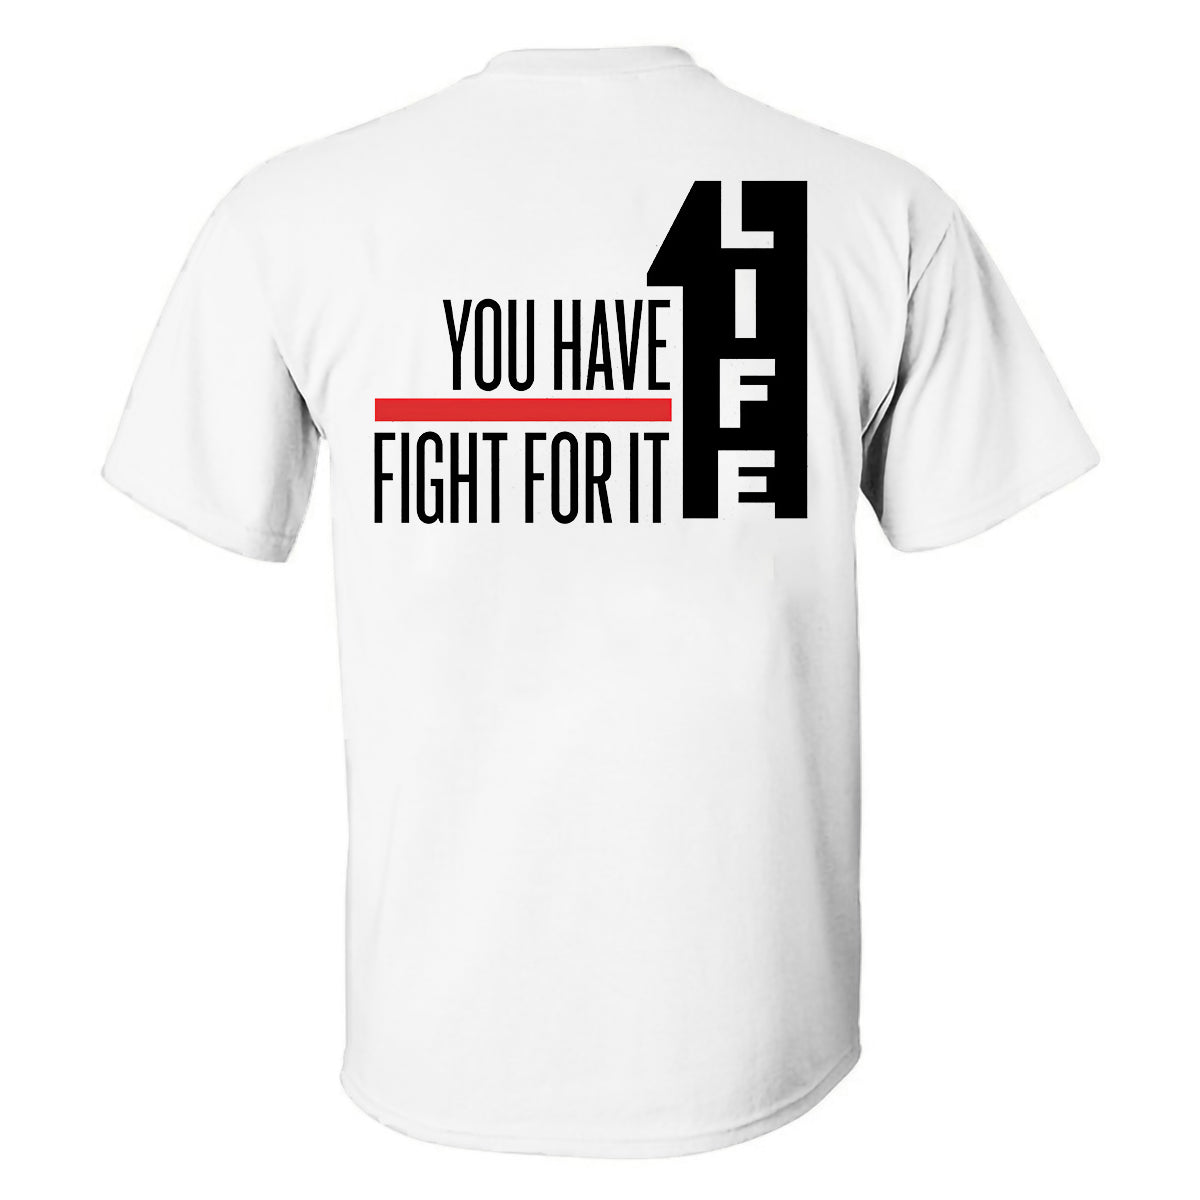 Life You Have Fight For It Printed T-shirt